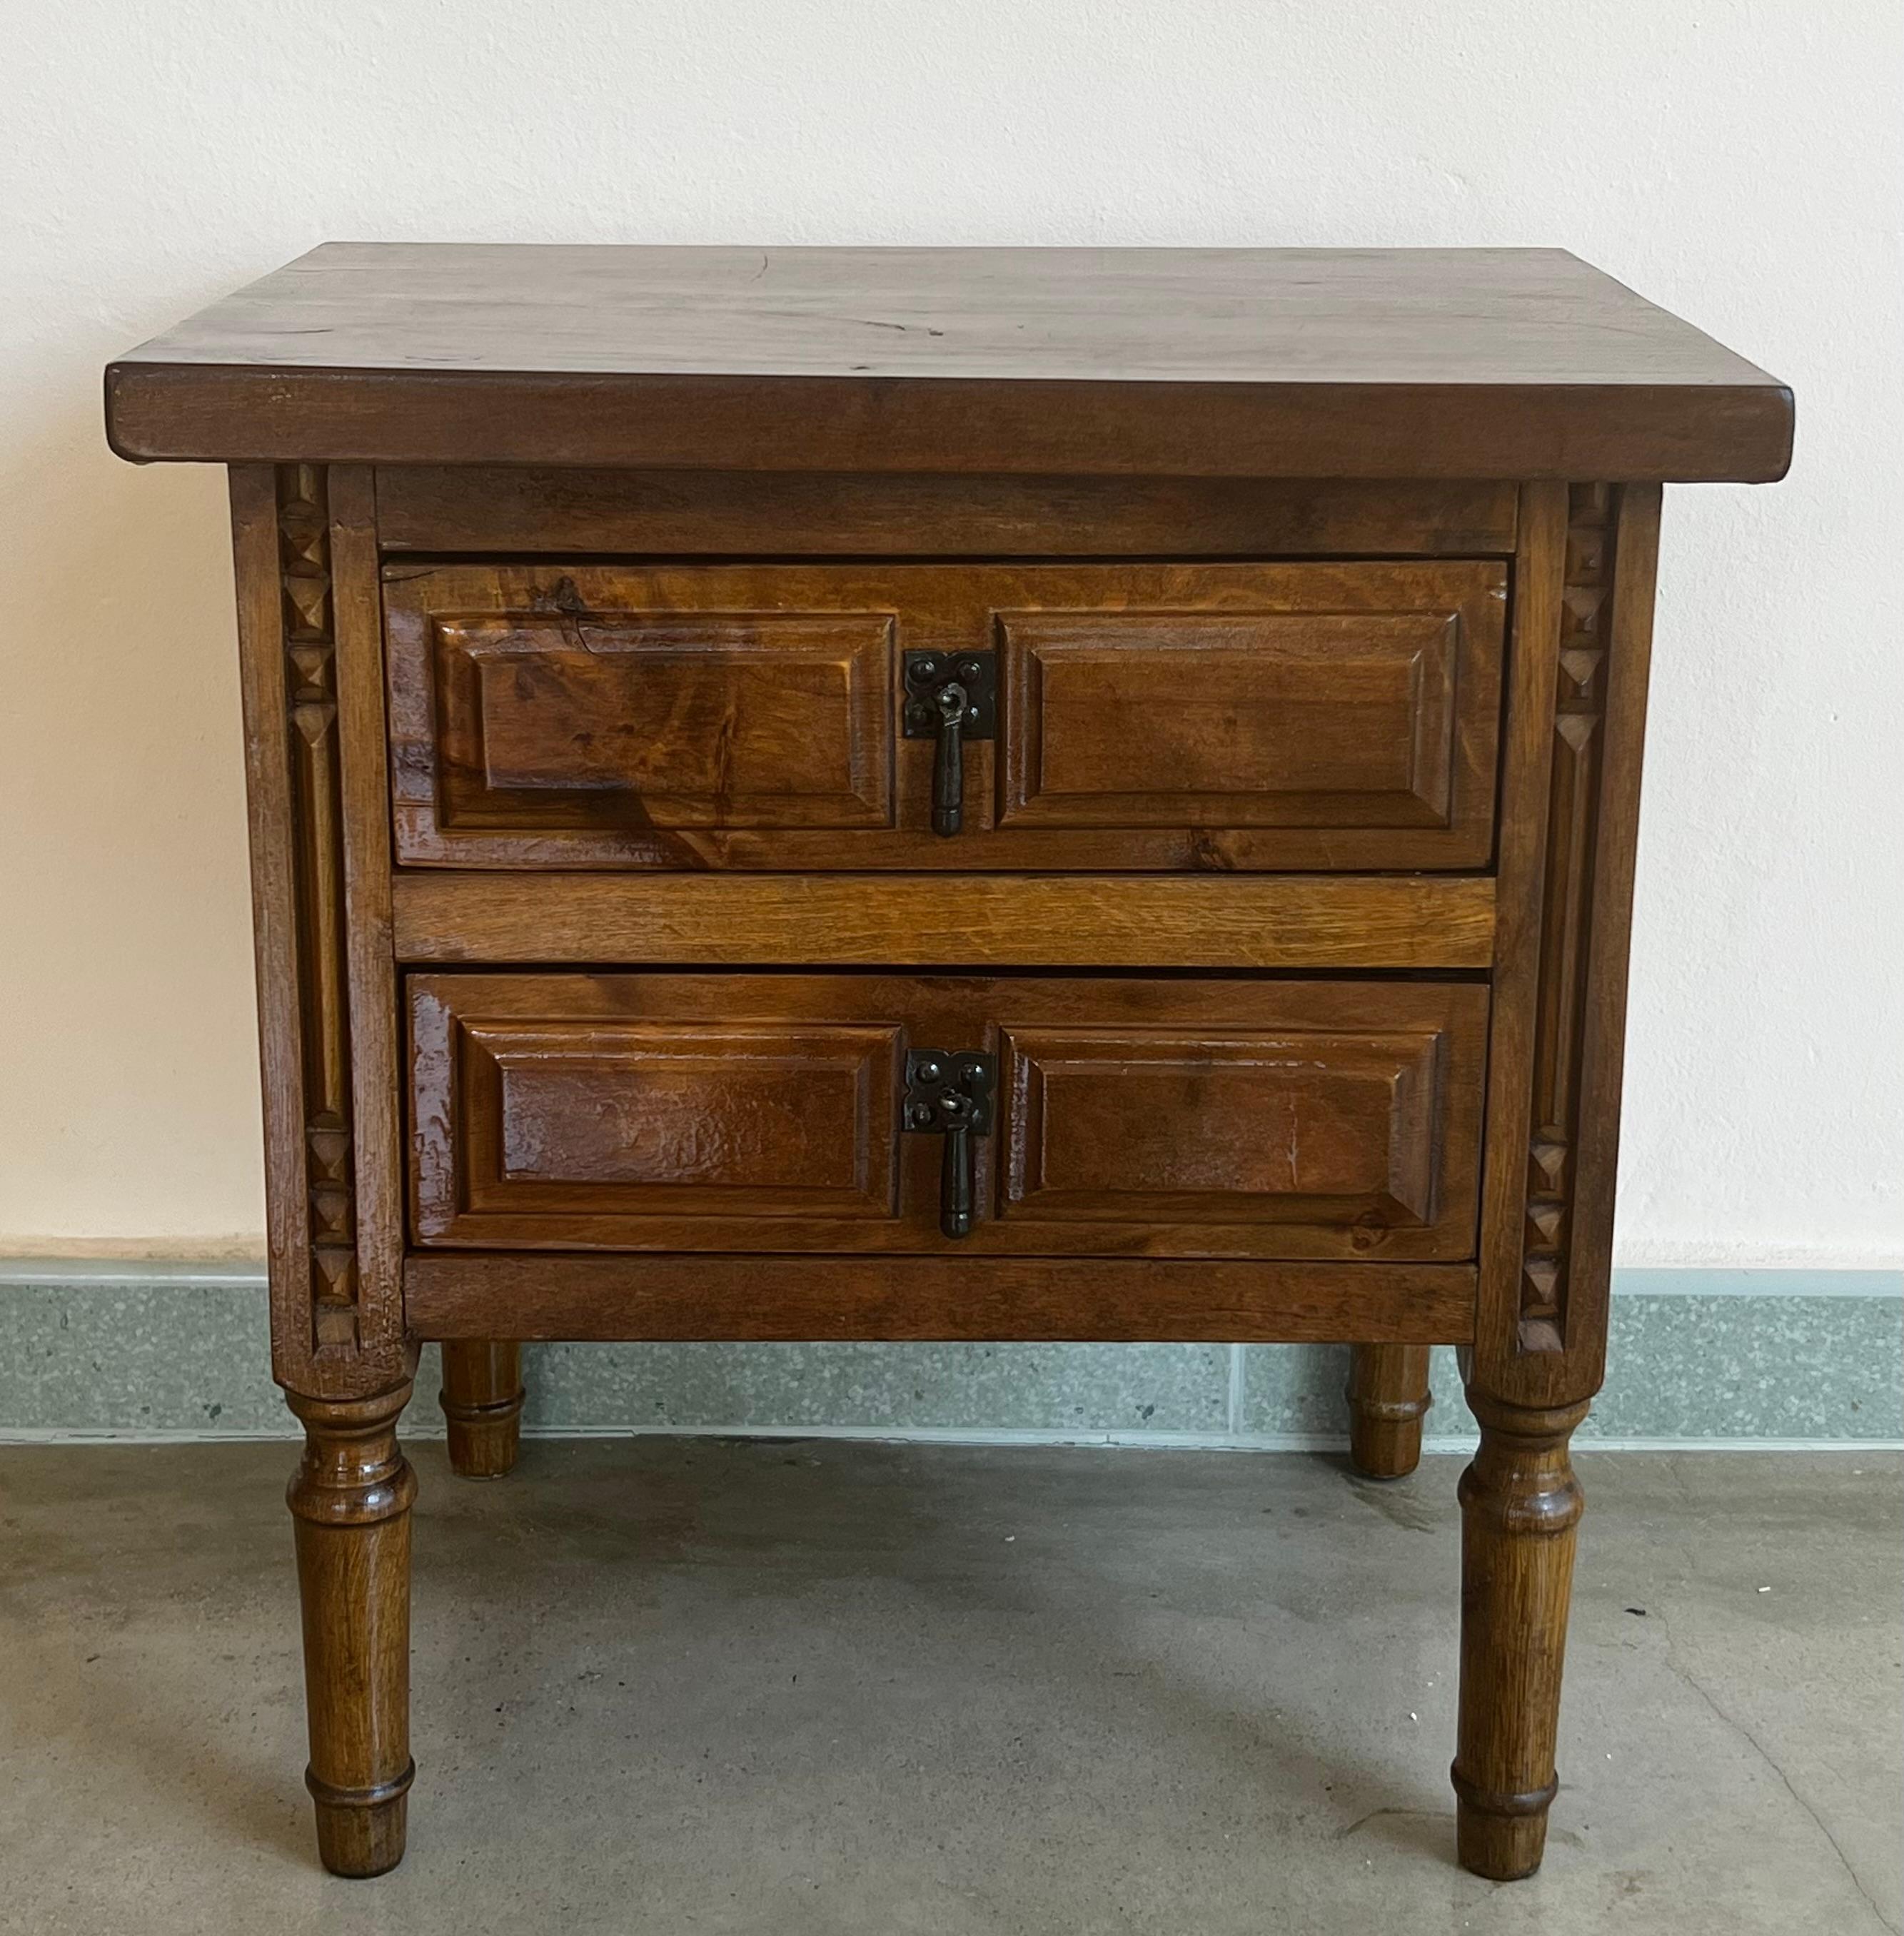 20th century pair of Spanish nightstands with two drawers, carved edges and iron hardware.
Beautiful tables that you can use like a nightstands or side tables, end tables, or table lamp.